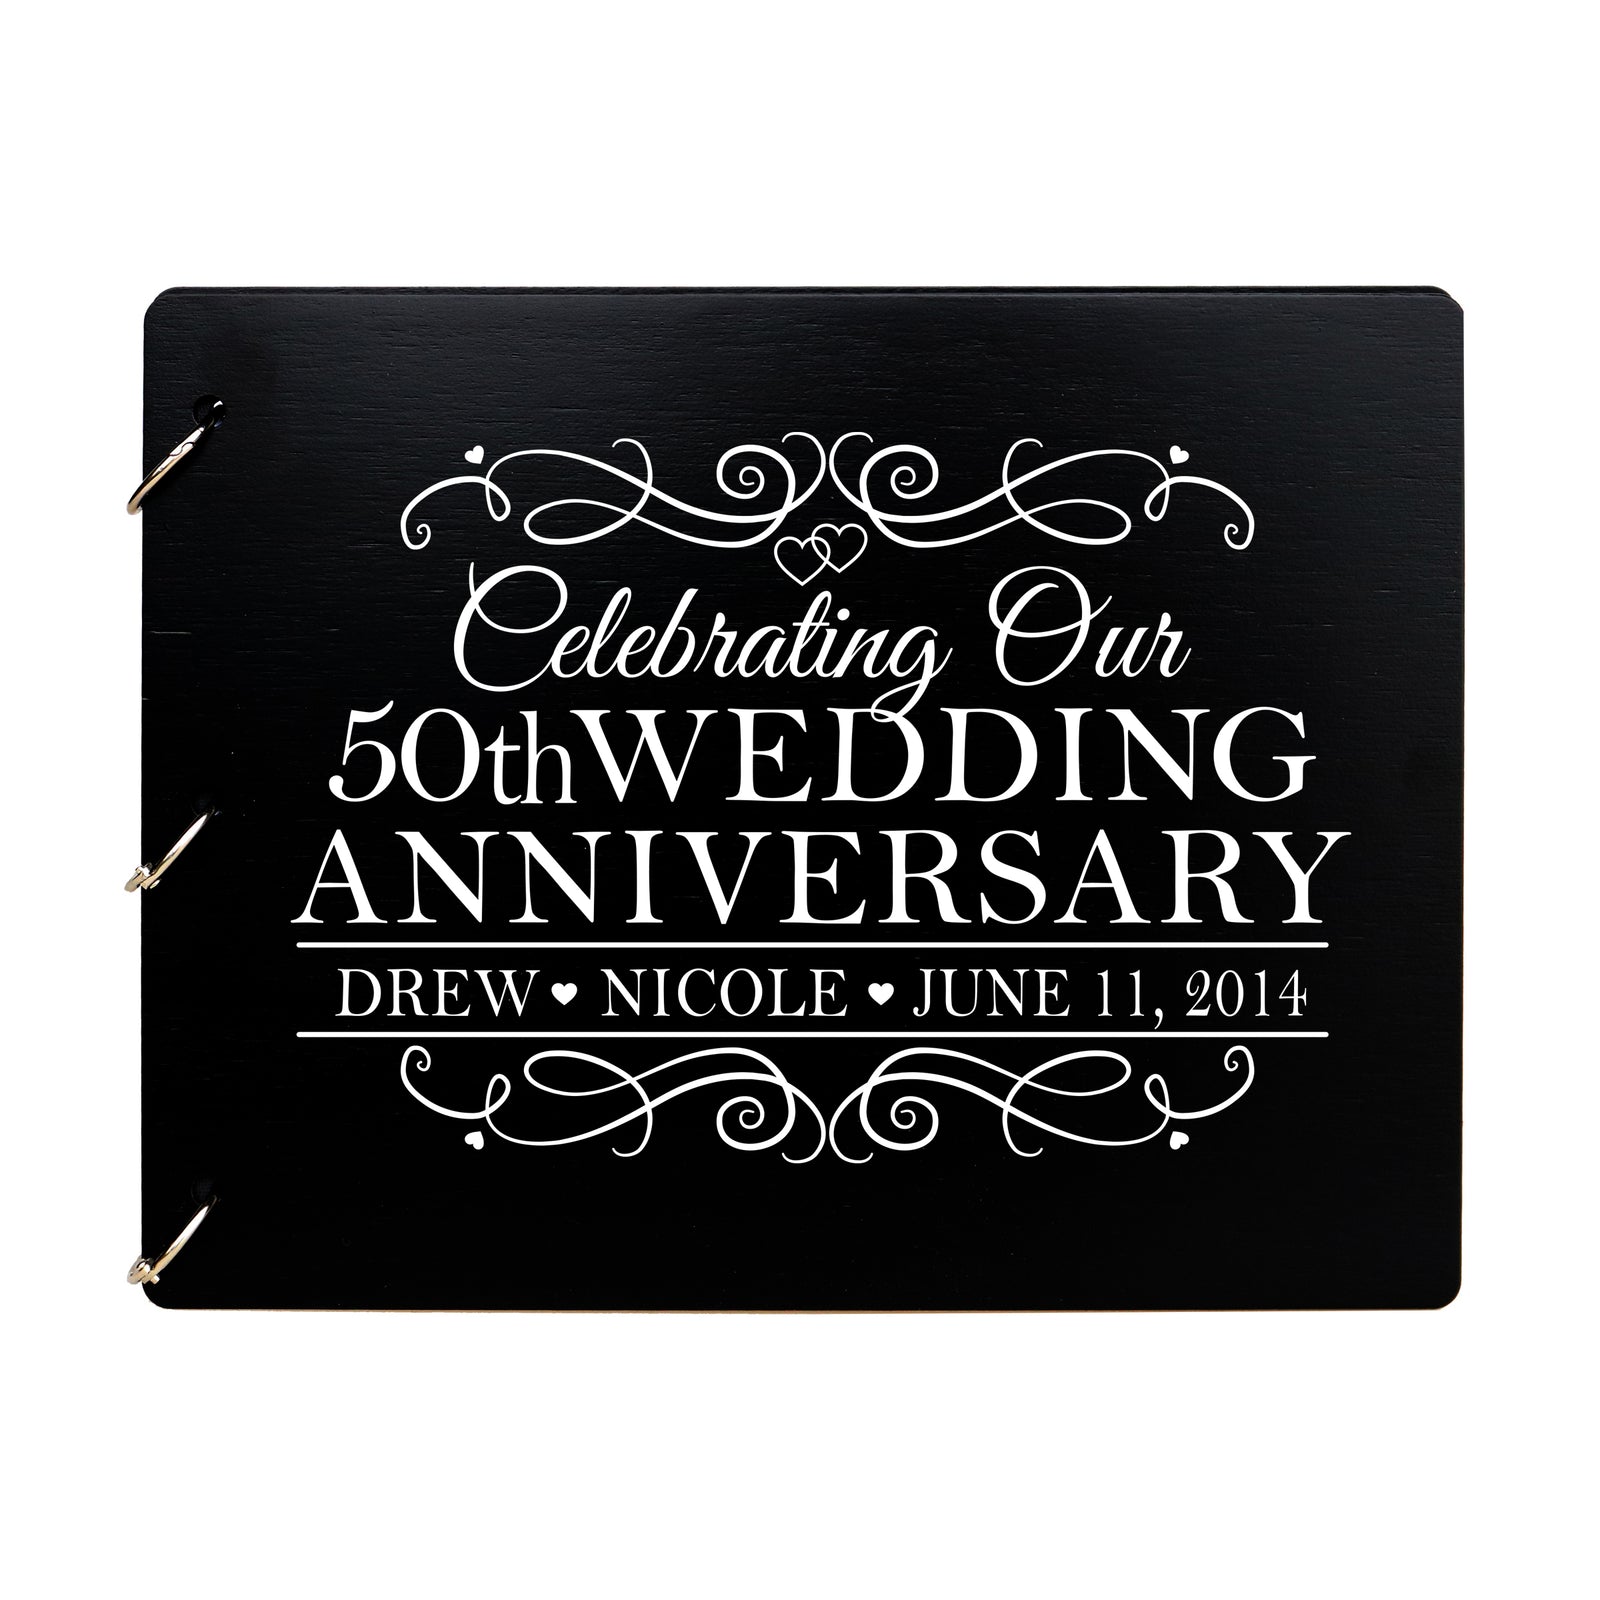 LifeSong Milestones Personalized Guestbook Sign for 50th Wedding Anniversary Gift Ideas